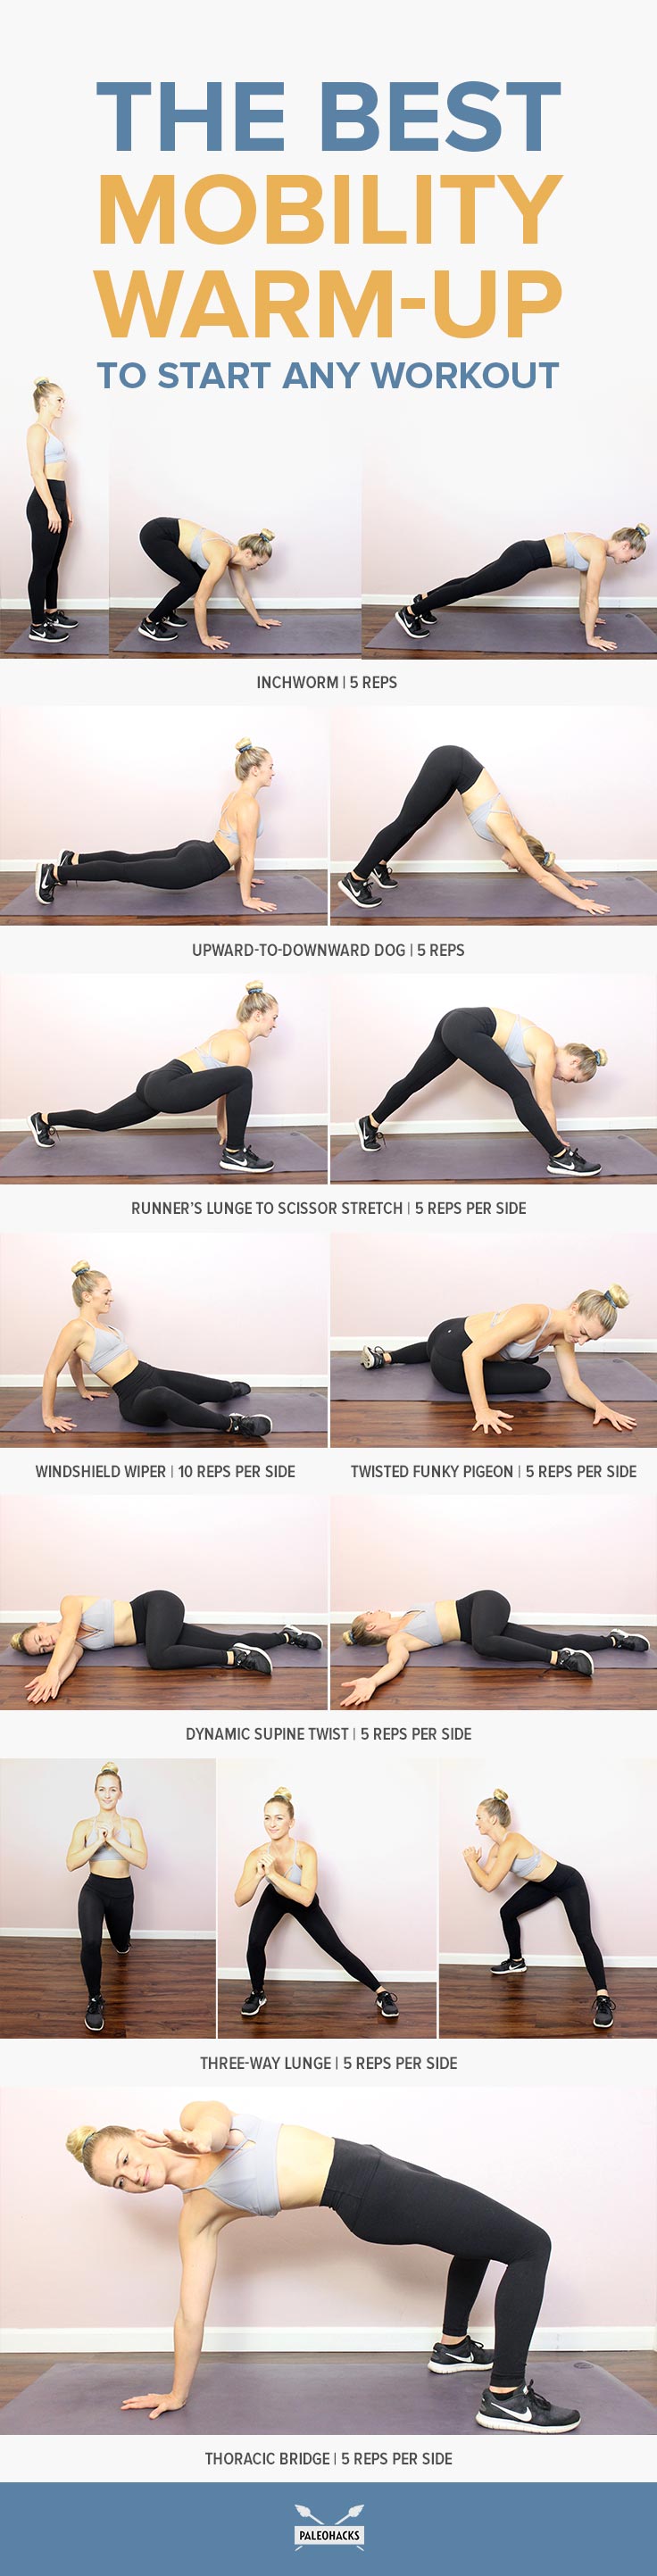 Do these eight mobility warm-up exercises before each workout to get your body ready for exercise. All you need is a soft surface or a mat.